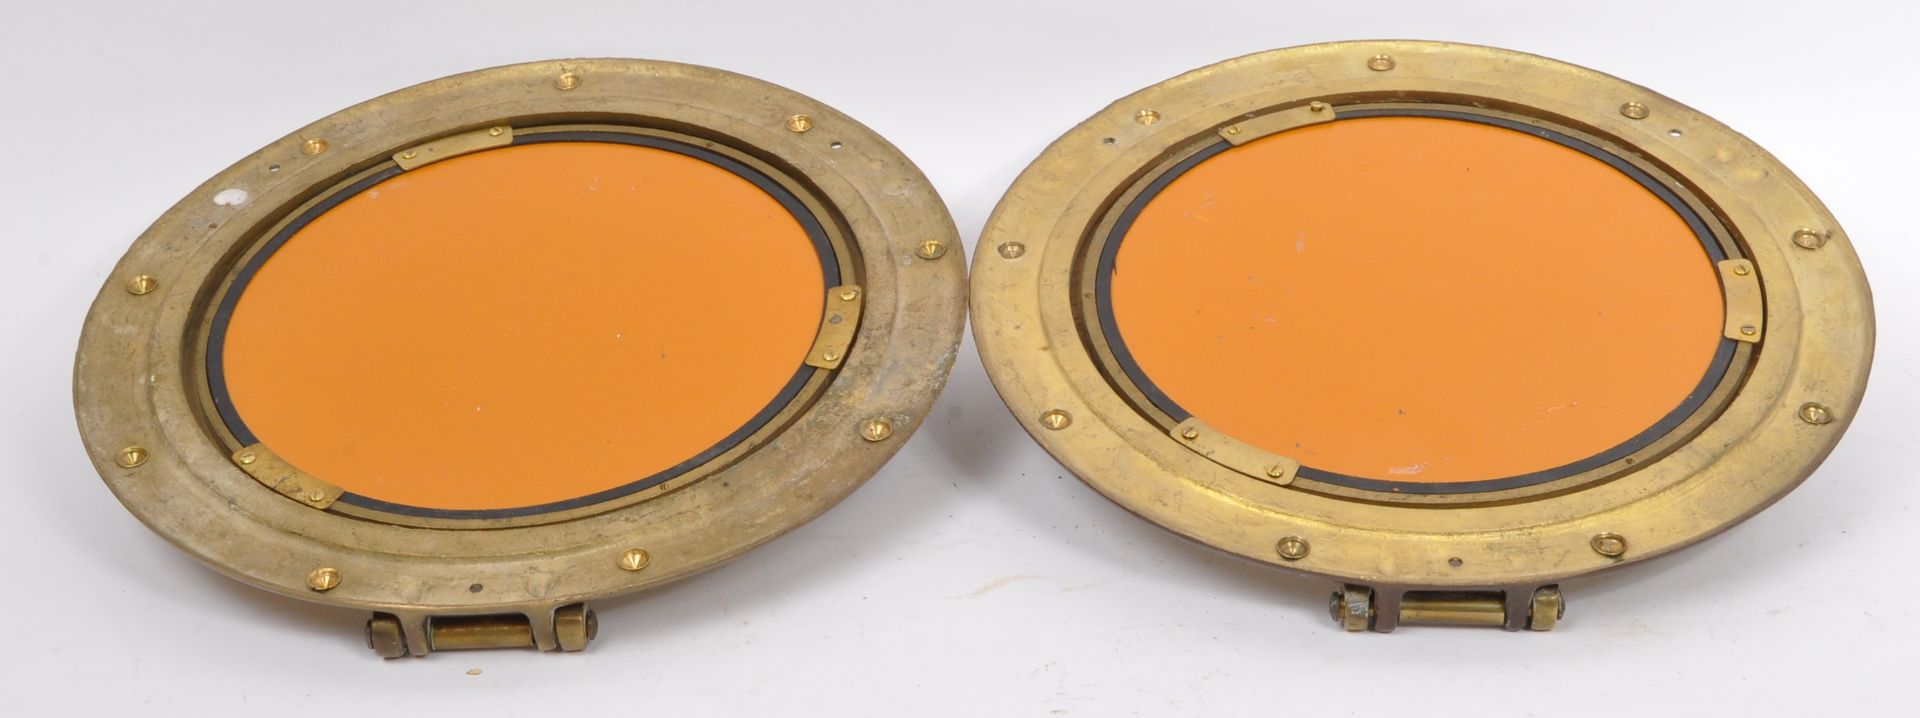 PAIR OF 20TH CENTURY SOLID BRASS SHIPS PORTHOLE MIRRORS - Image 2 of 4